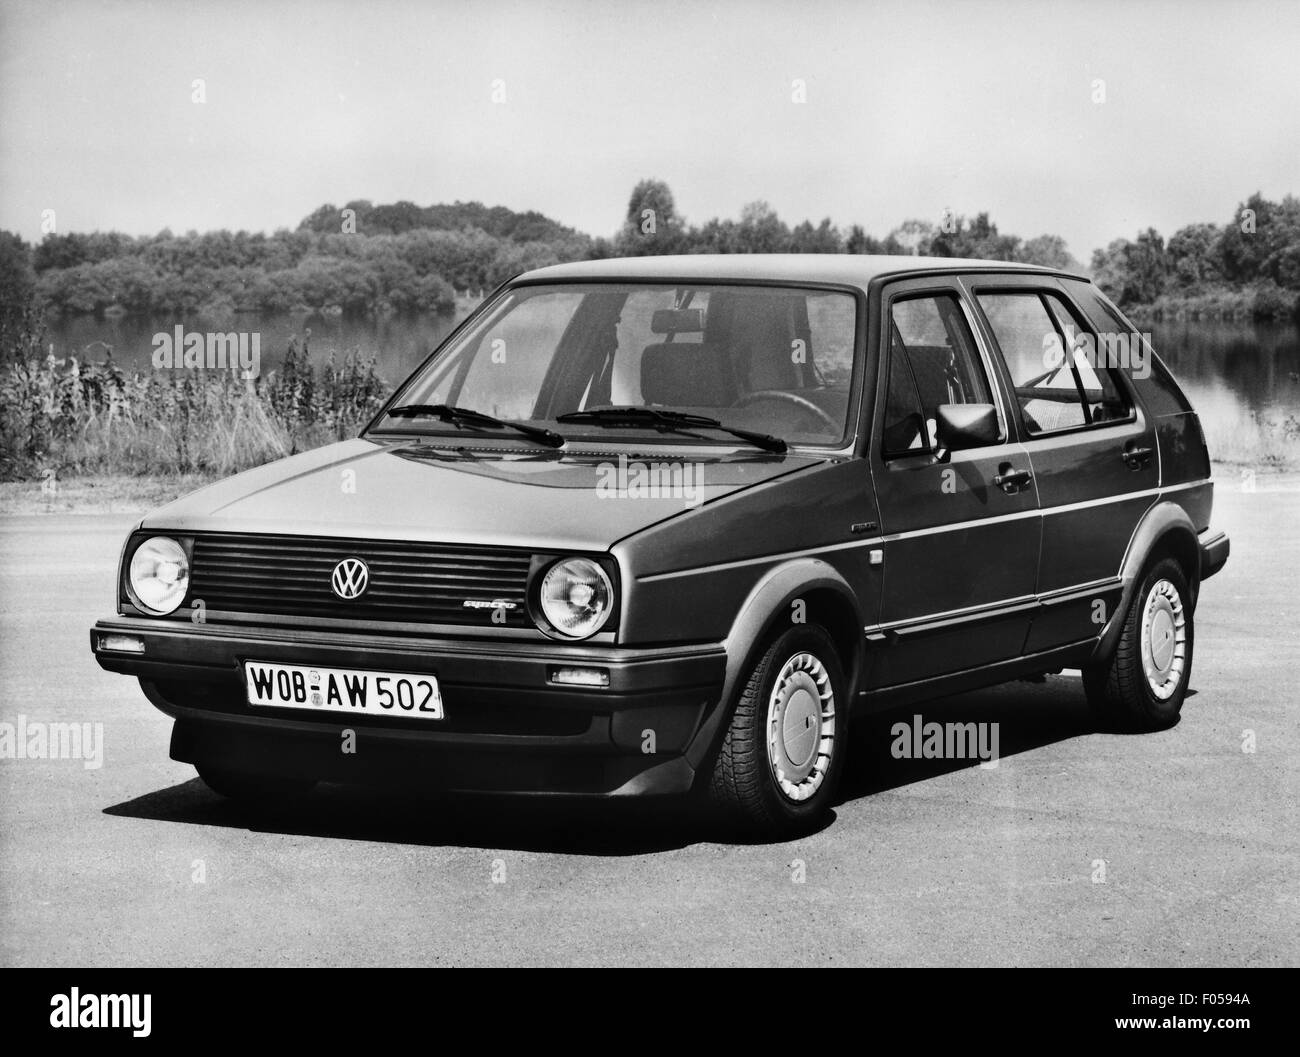 Transport / Transport, Auto, Fahrzeugvarianten, Volkswagen, VW Golf Mk2 CL Syncro, 80er Jahre, Additional-Rights-Clearences-not available Stockfoto